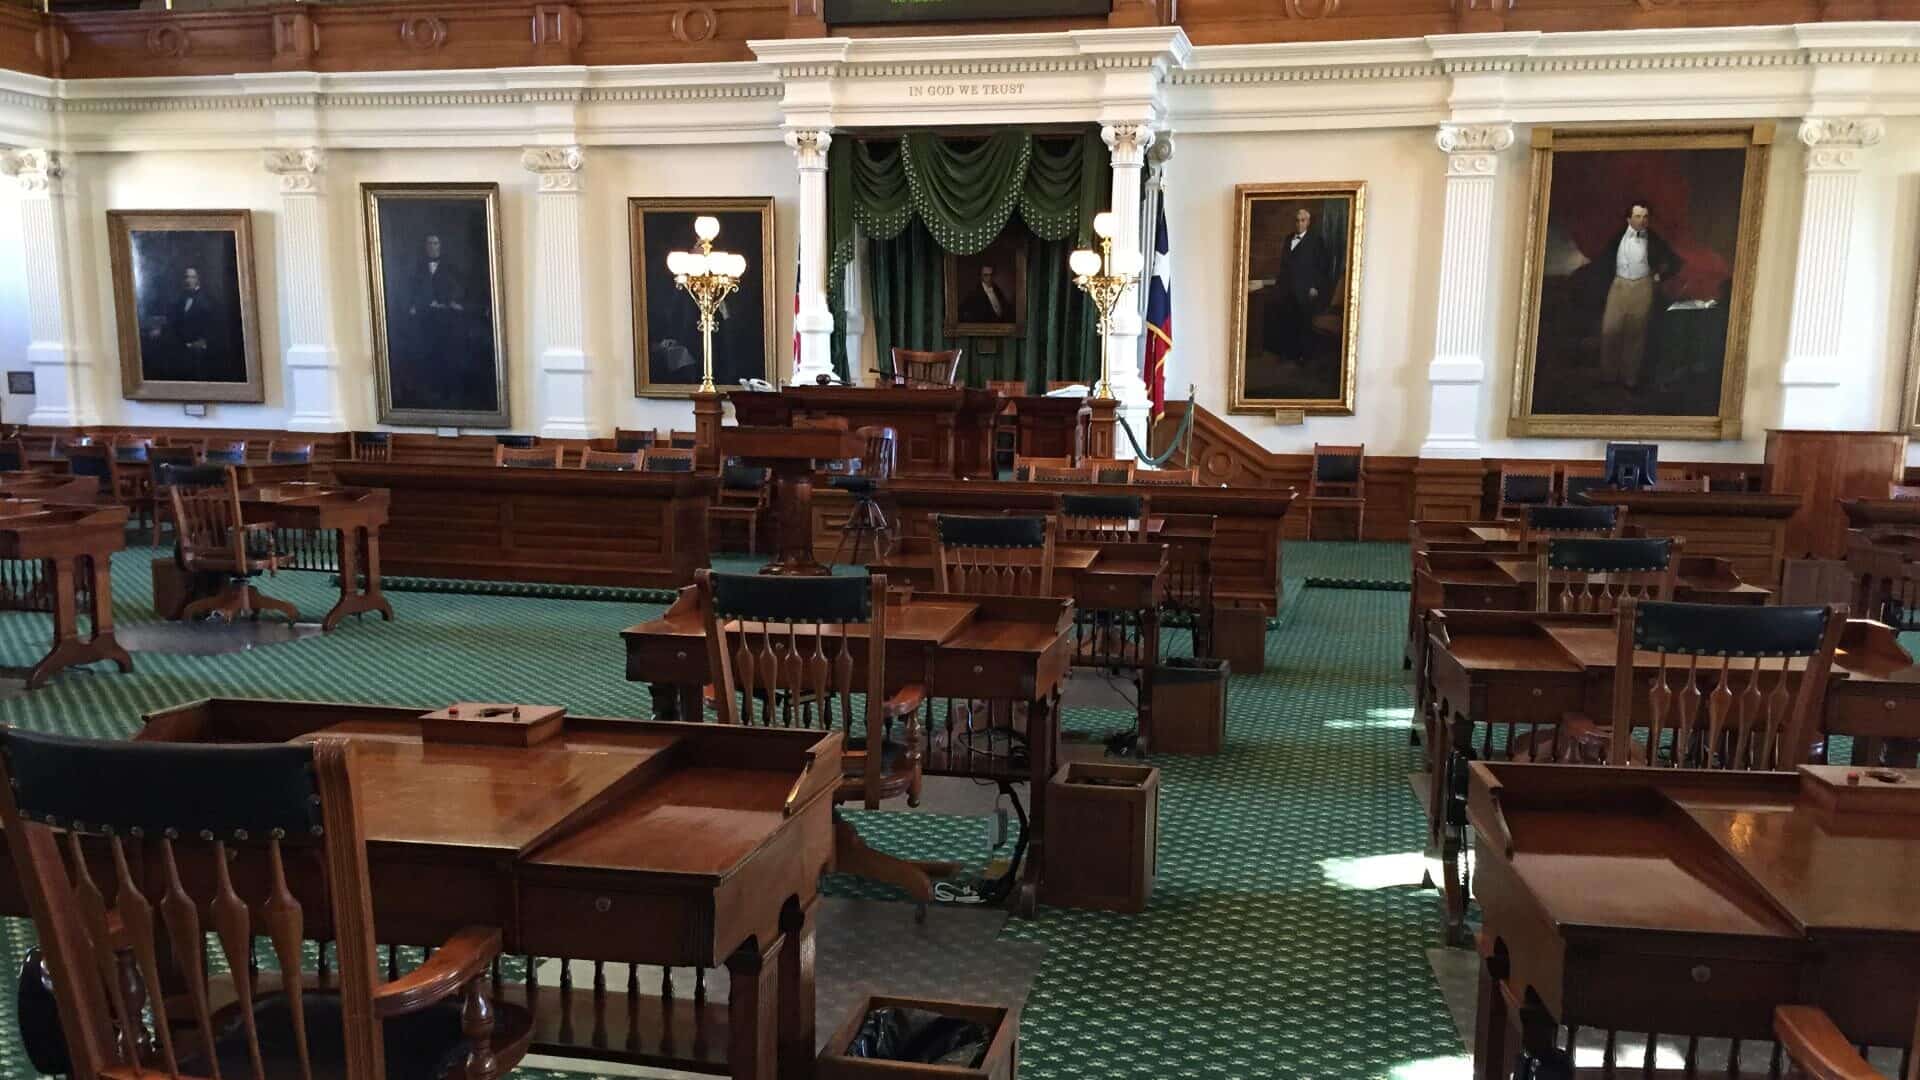 Large room with green carpet and dark wooden desks and chairs at a Capitol building